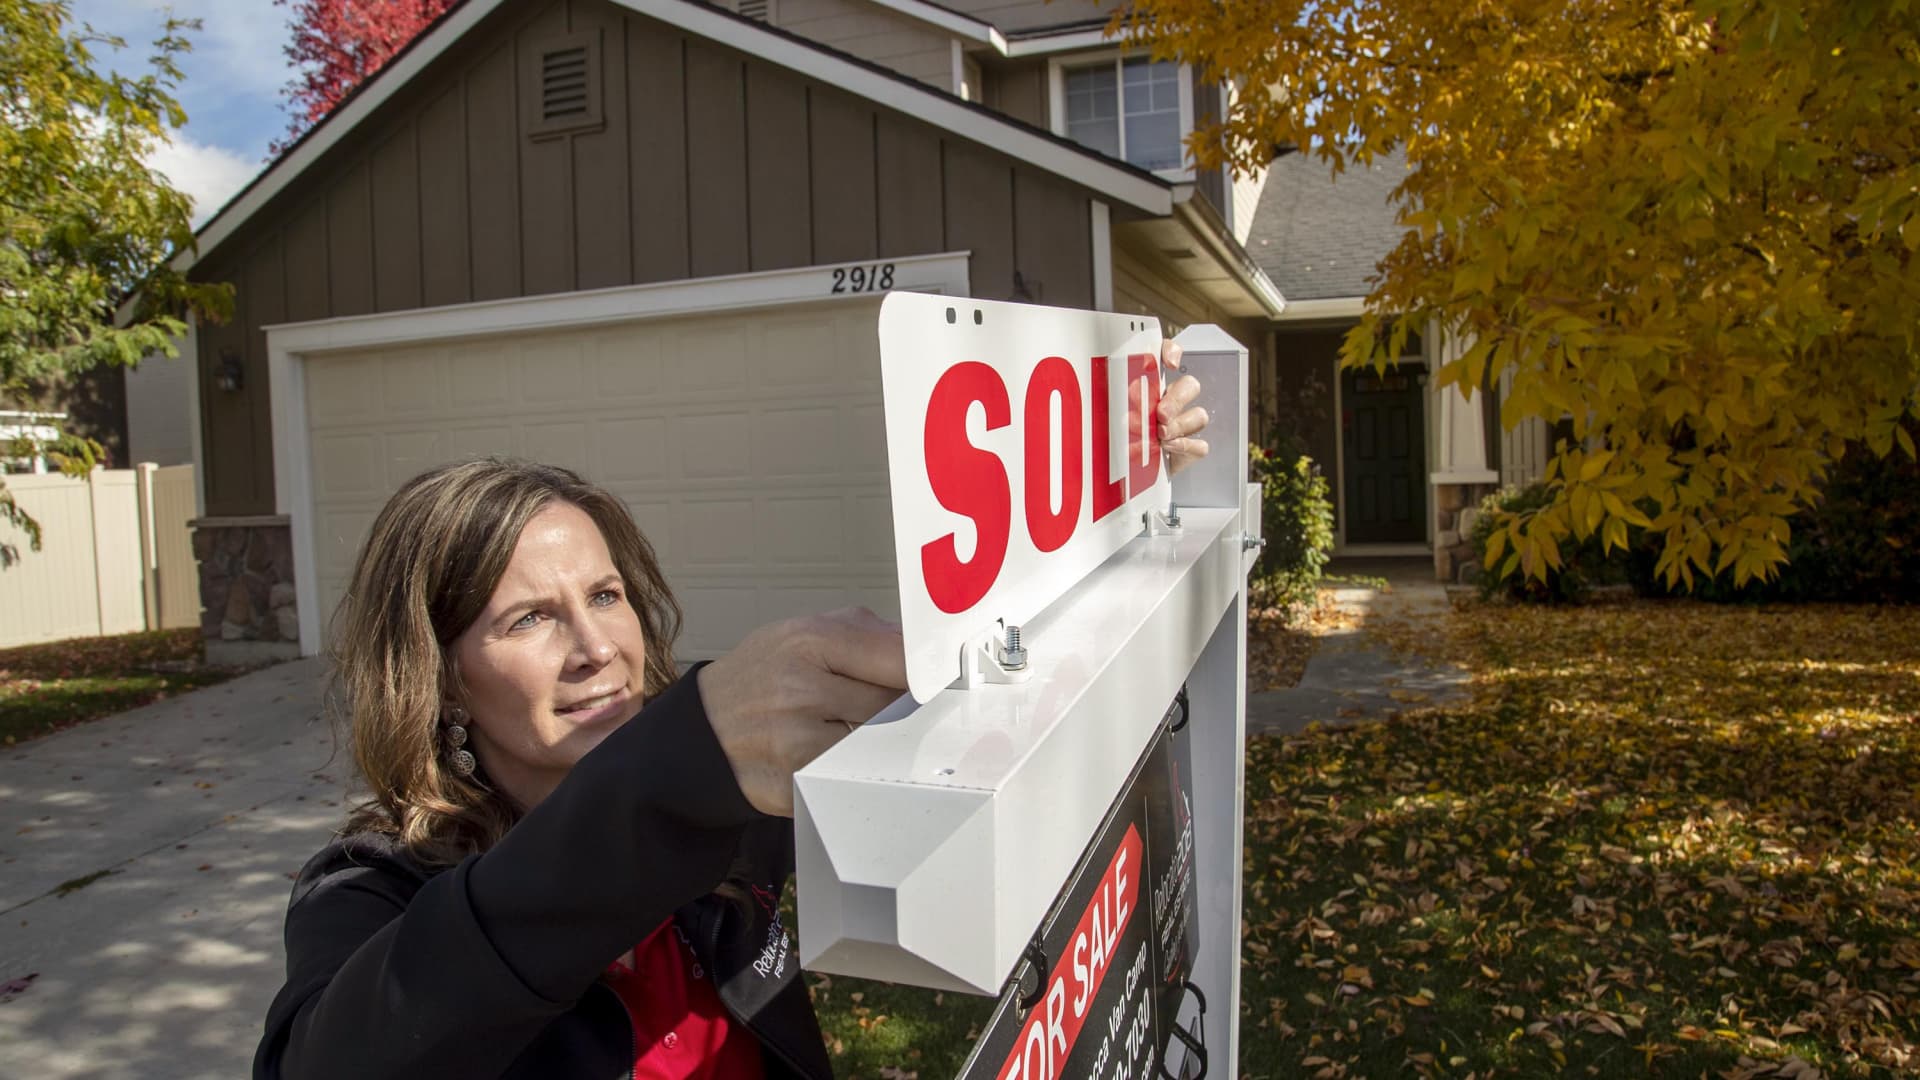 Existing home sales fall to a 10-year low in September